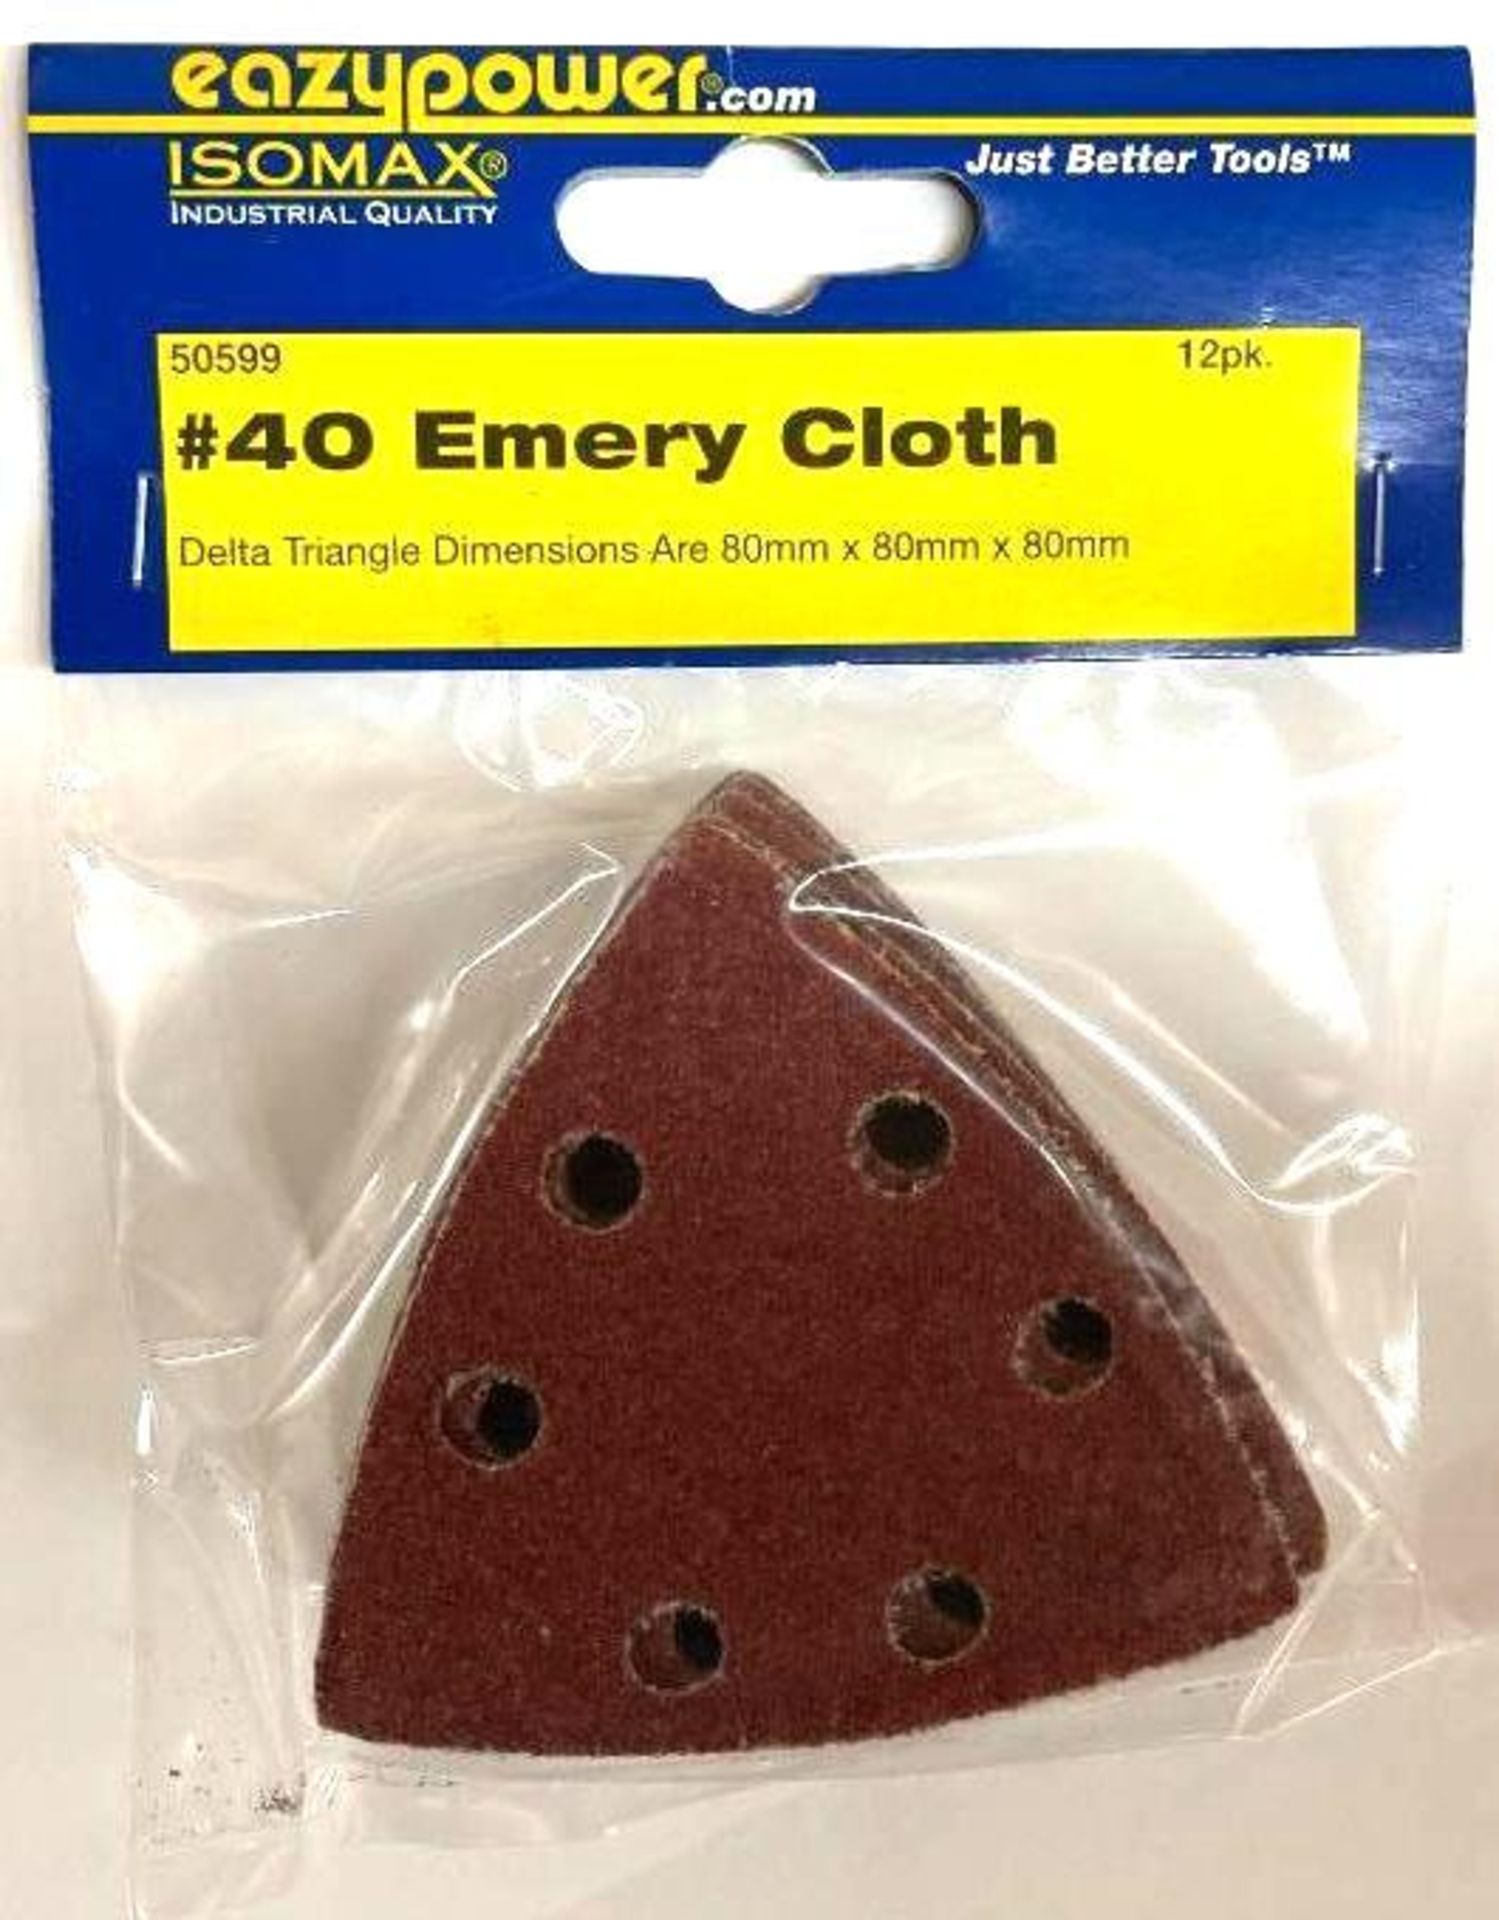 DESCRIPTION (30) 12CT PACKS OF #40 EMERY CLOTH BRAND/MODEL EAZY POWER 50699 THIS LOT IS ONE MONEY QU